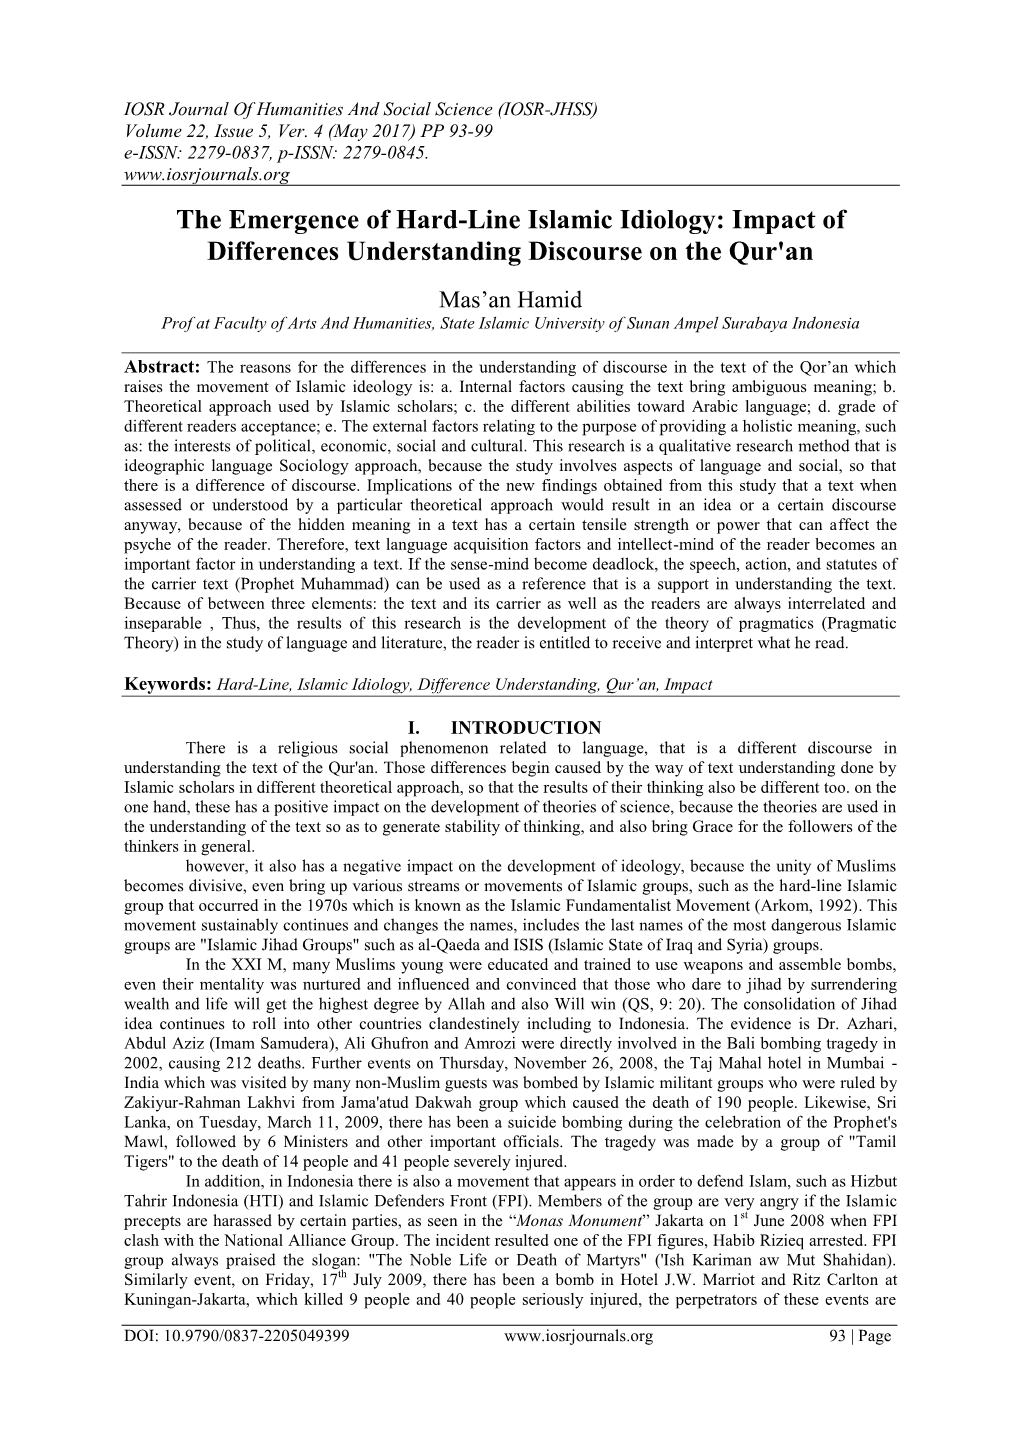 The Emergence of Hard-Line Islamic Idiology: Impact of Differences Understanding Discourse on the Qur'an